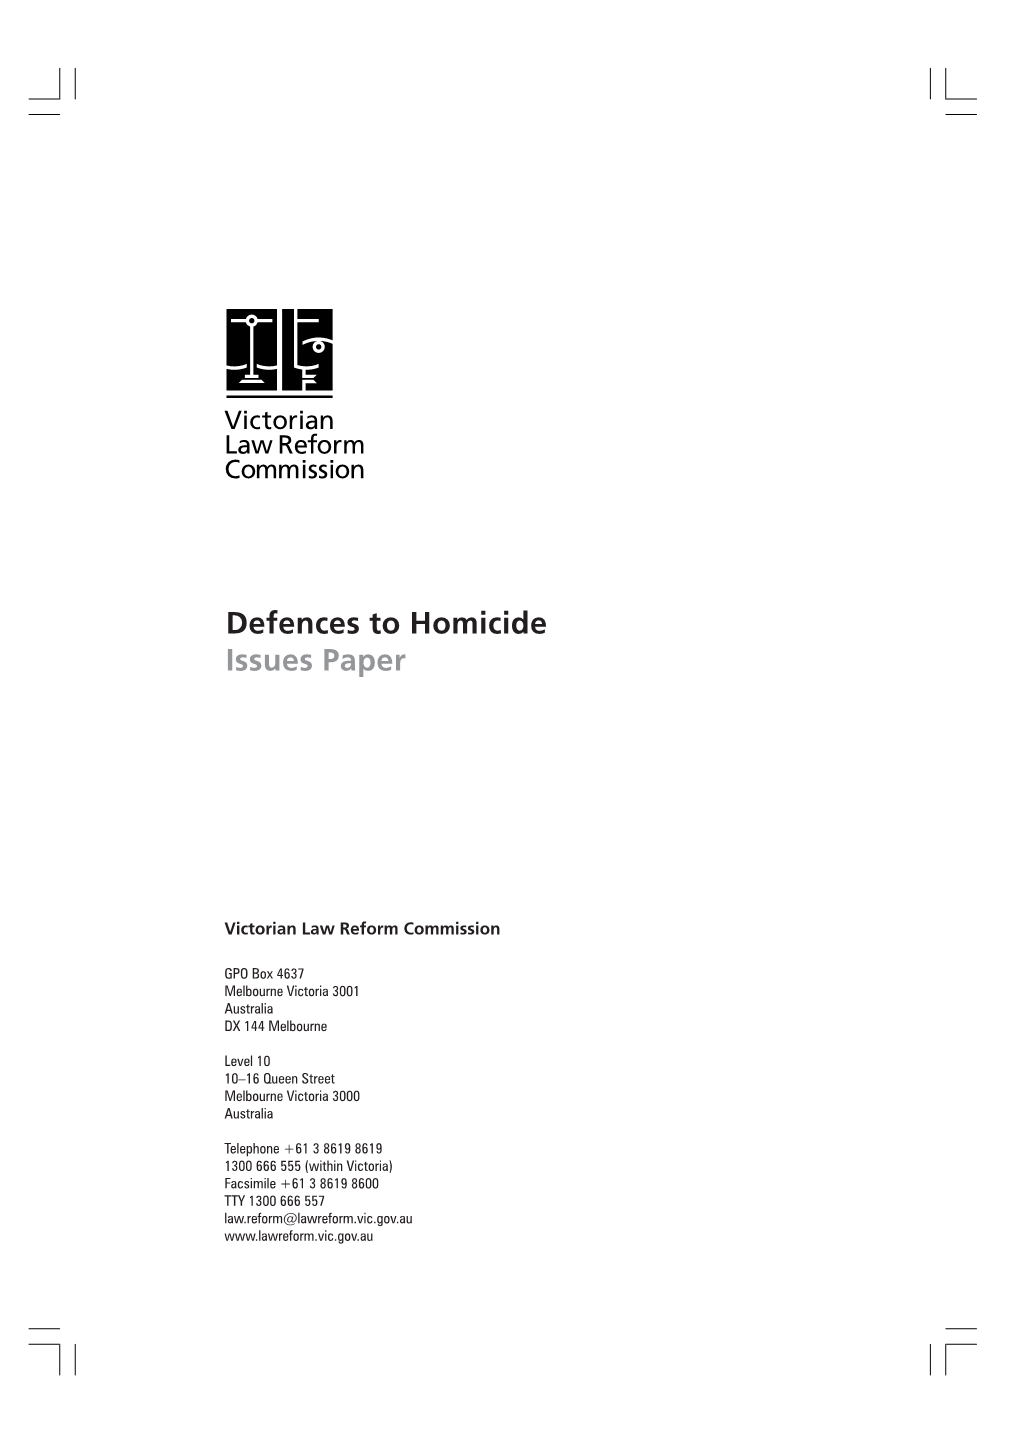 Defences to Homicide Issues Paper